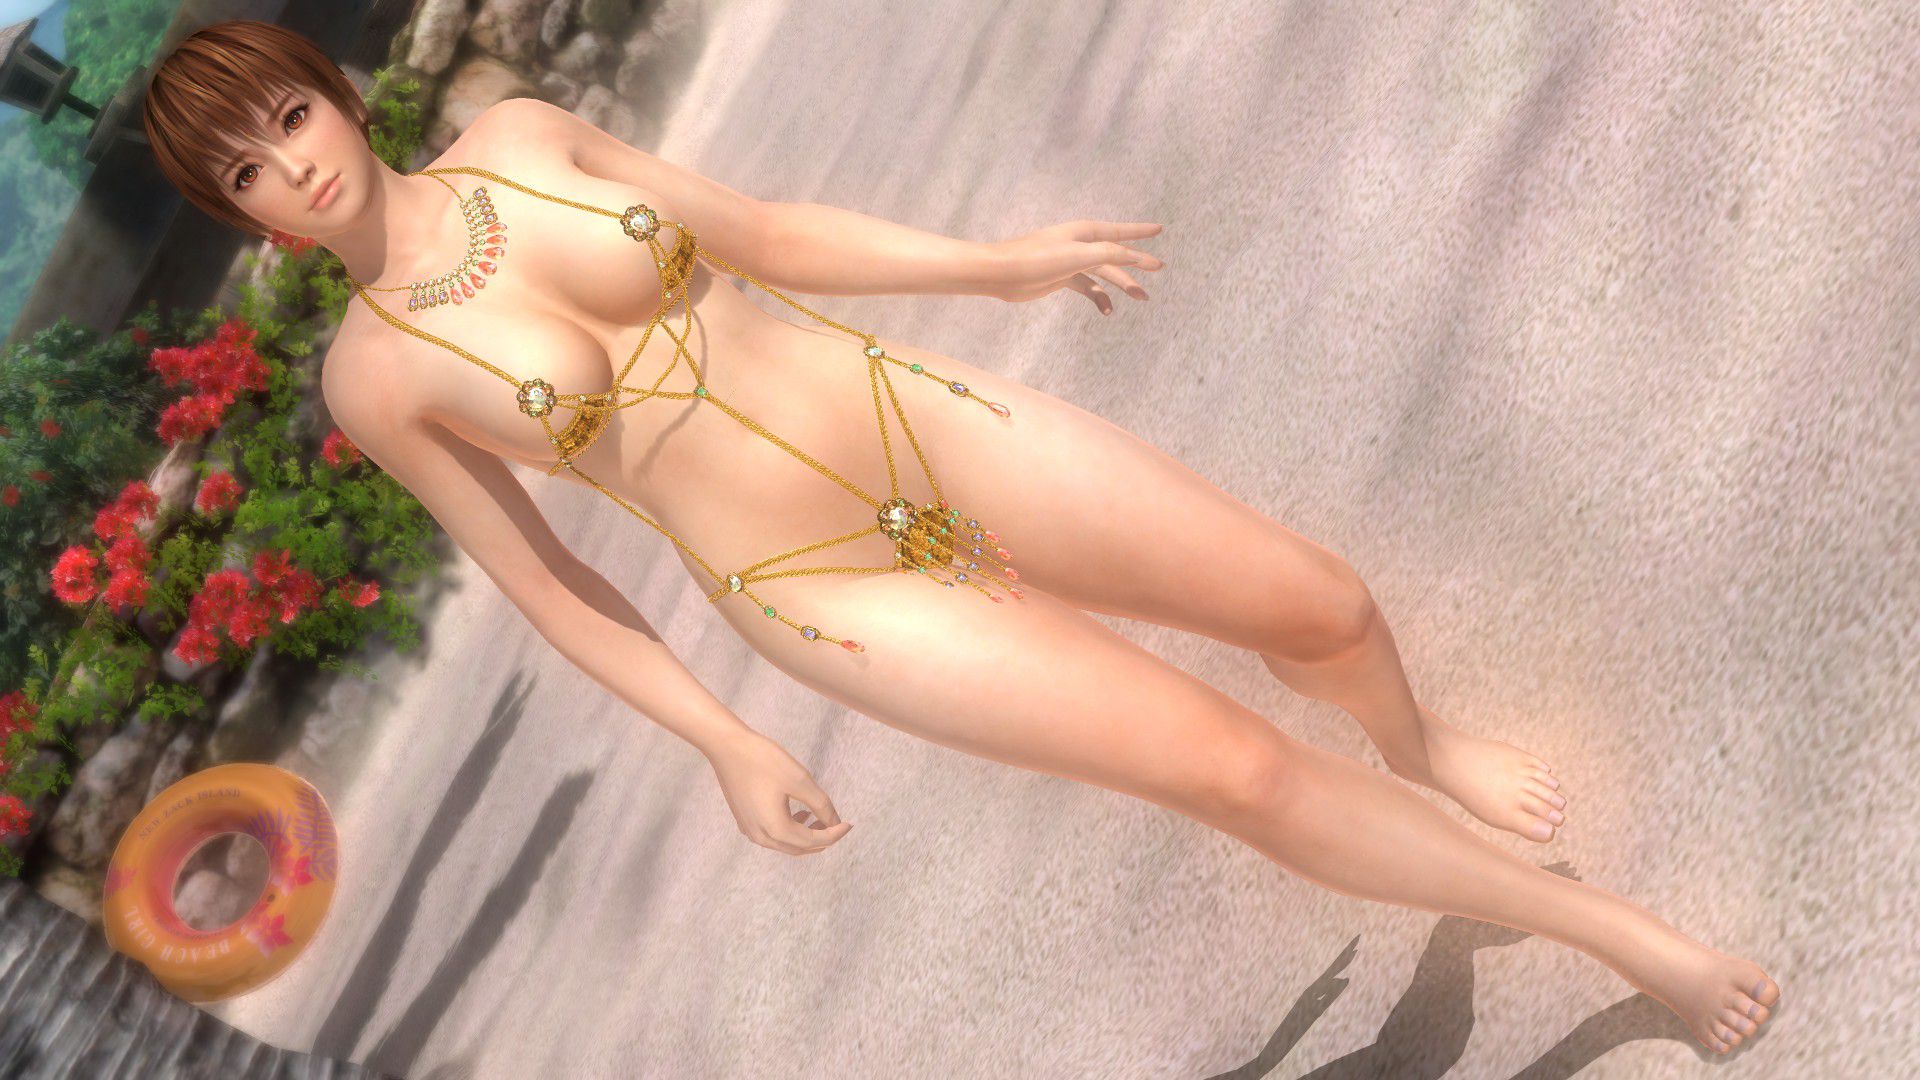 [DEAD OR ALIVE] 3D CG erotic images of DOA heroines Part 5 9